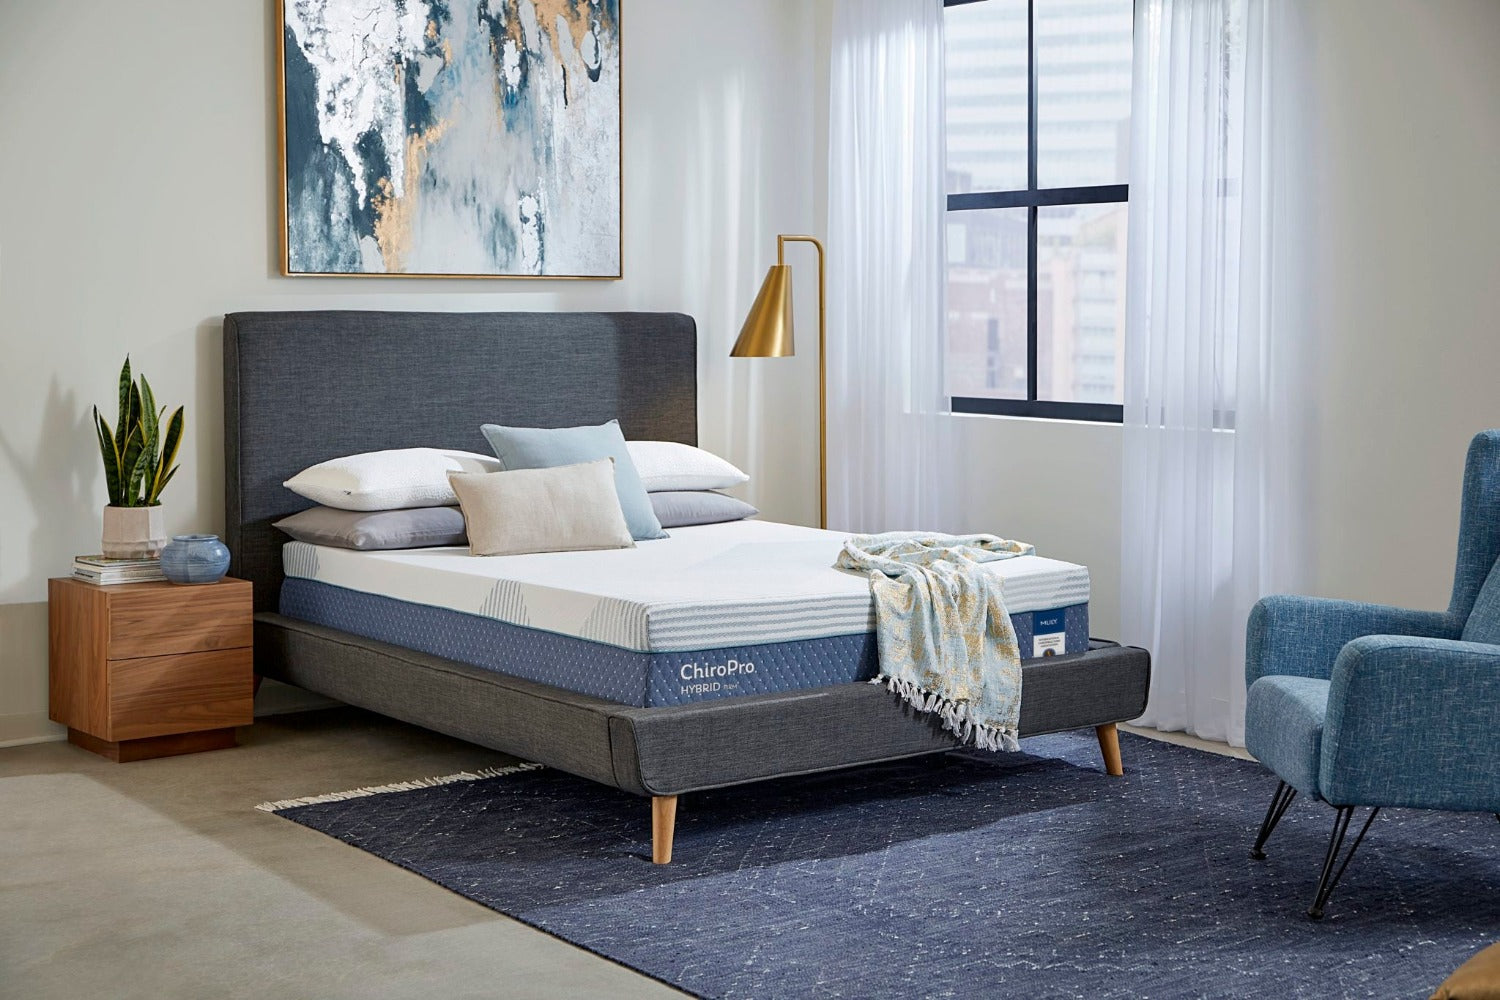 MLILY ChiroPro Firm Hybrid Mattress at Luxurious Beds and Linens